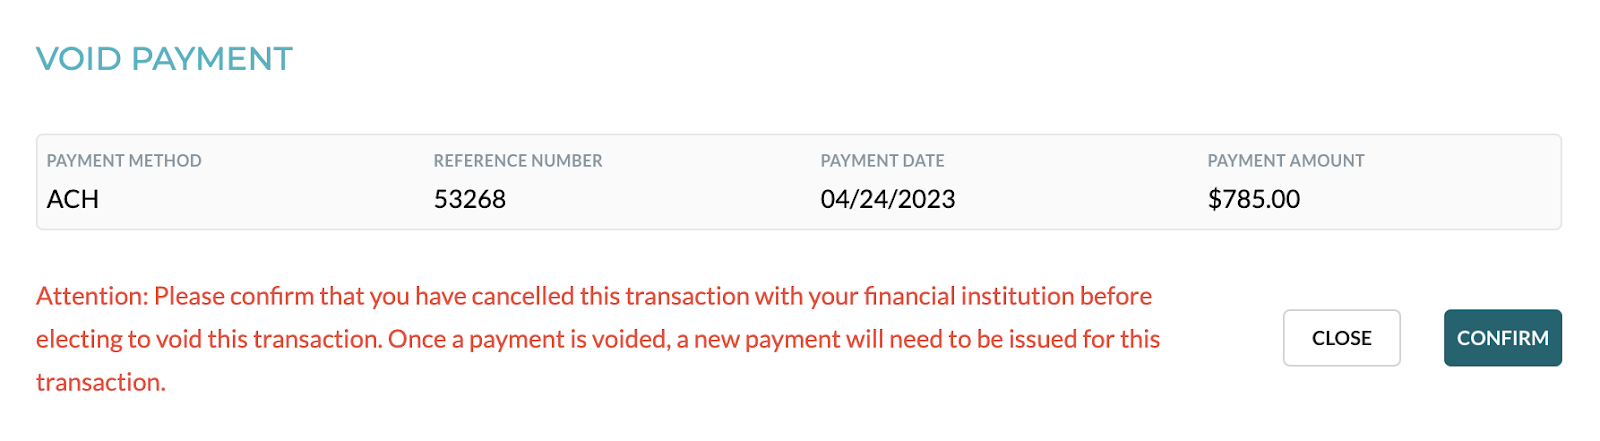 void_payment_3.png